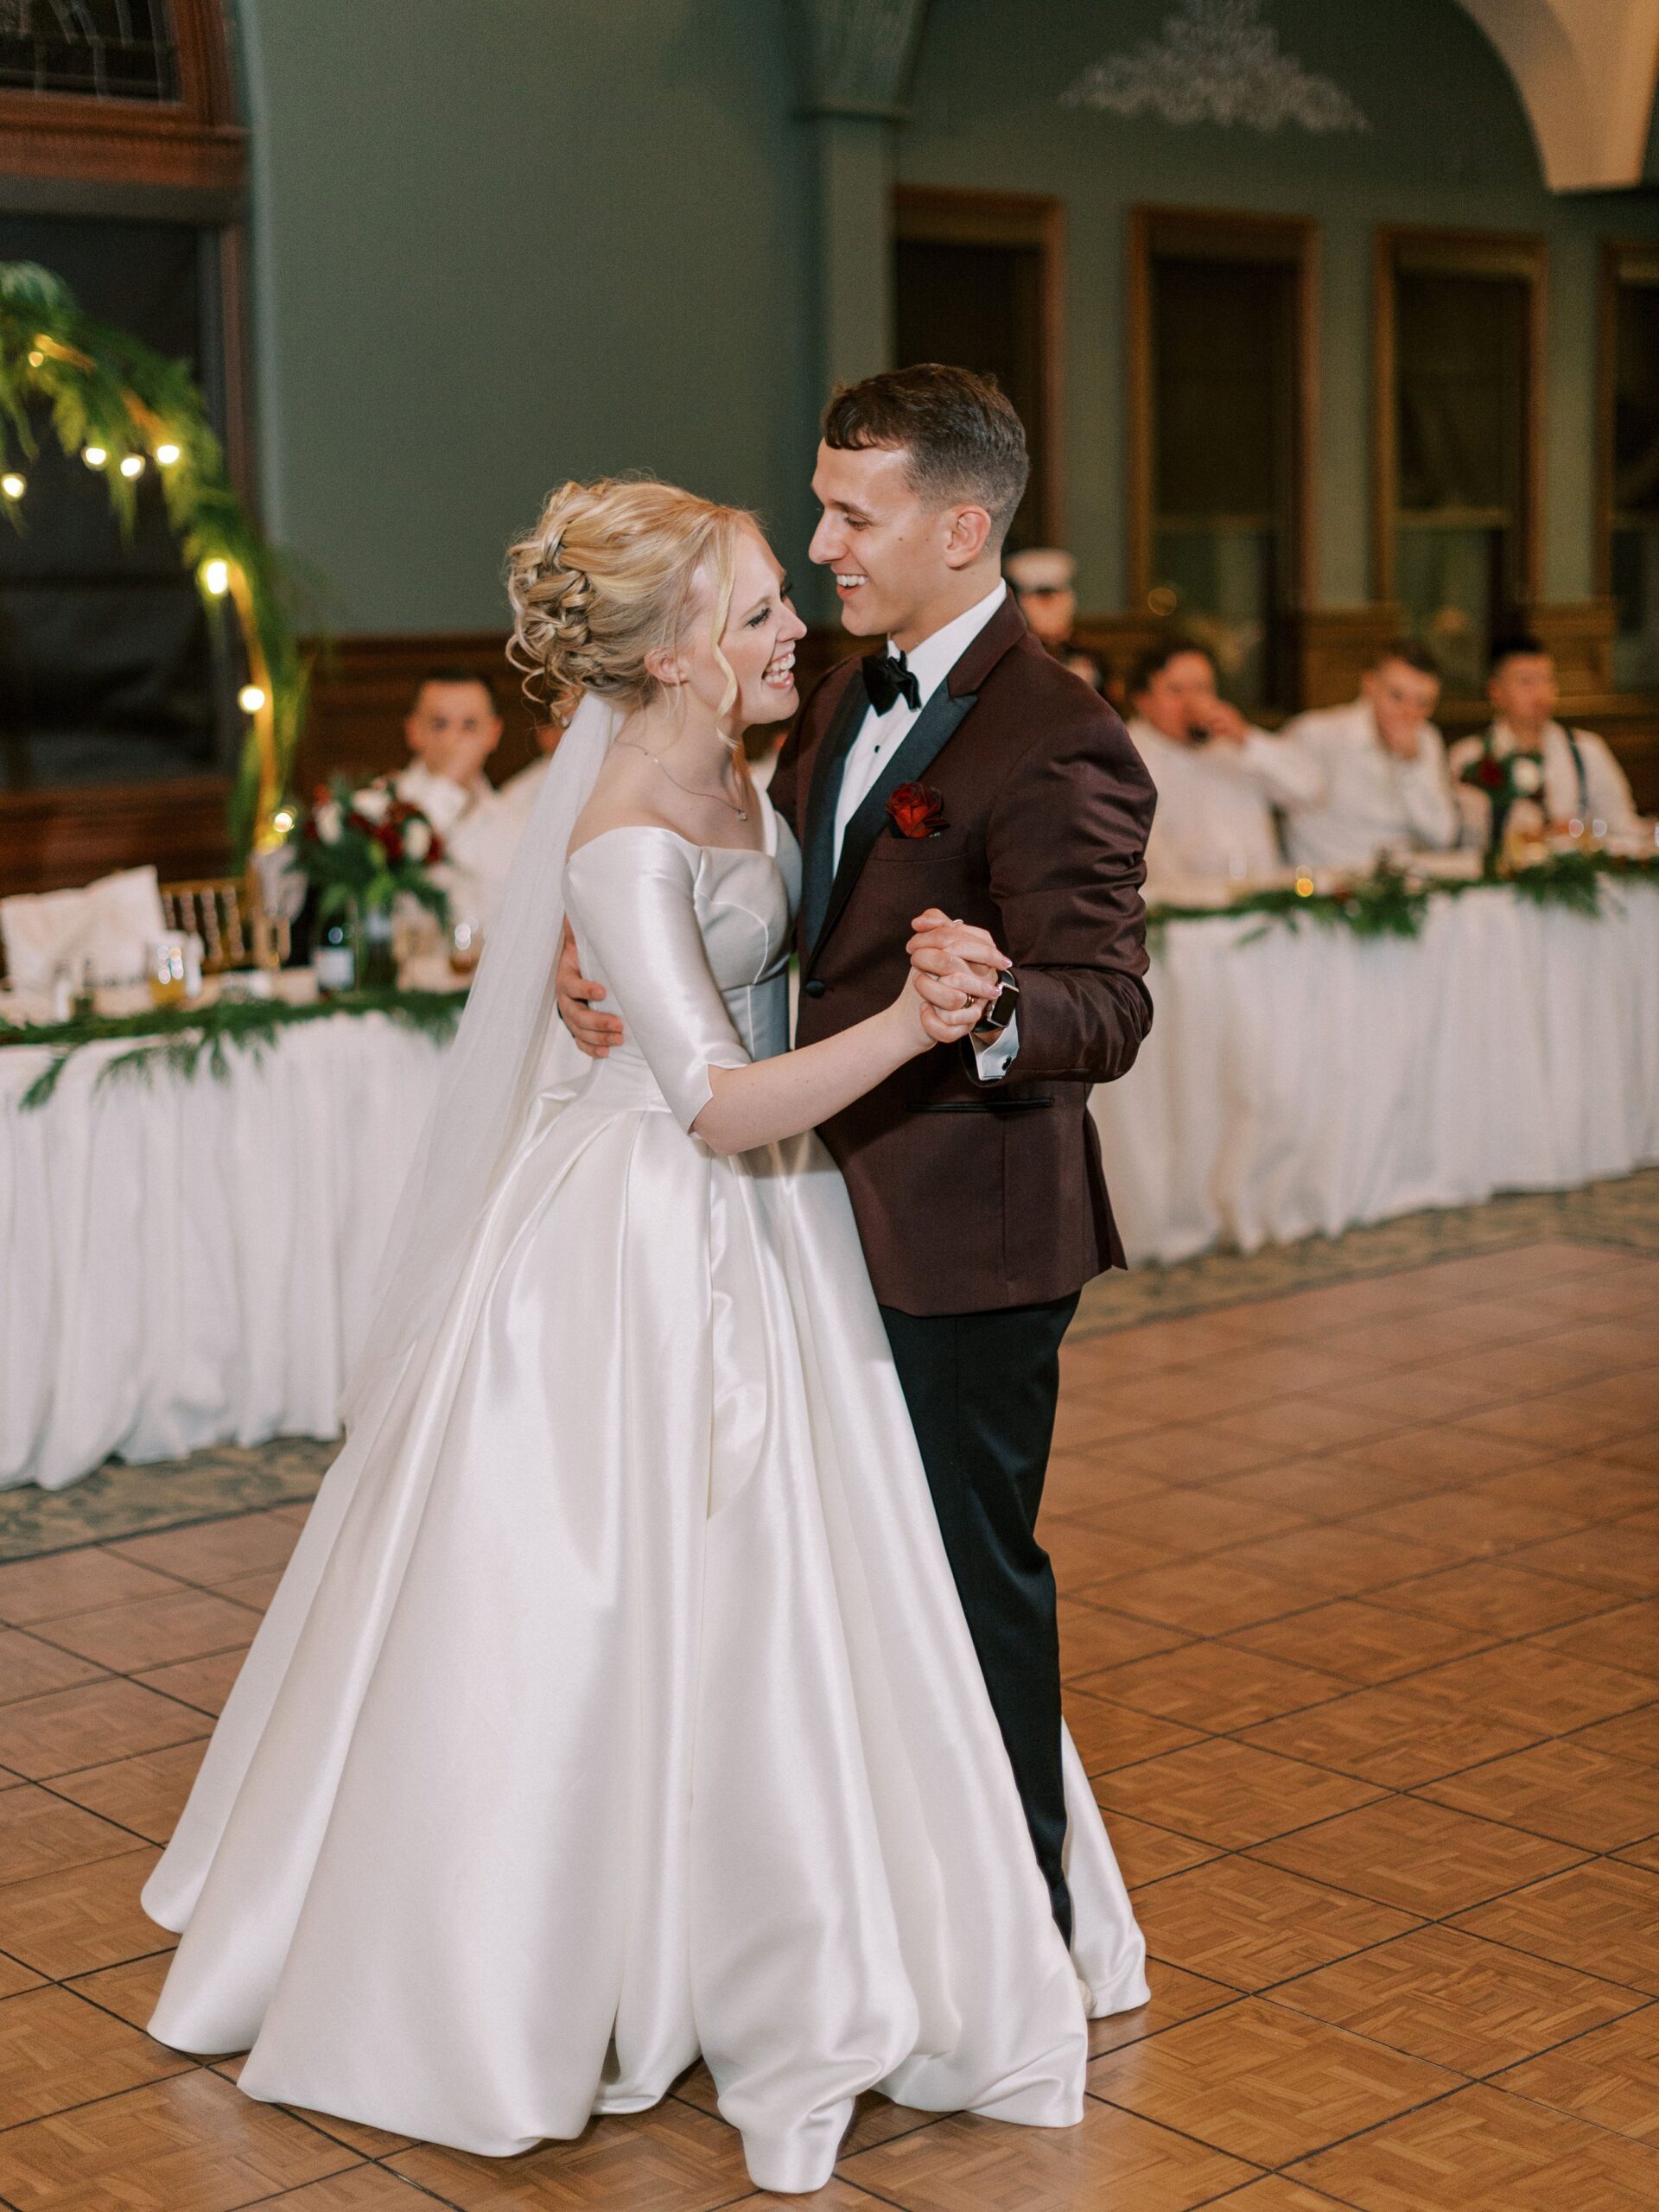 Bride and groom dancing at their Ohio wedding captured by Ohio wedding photographer Sierra Dyer Co